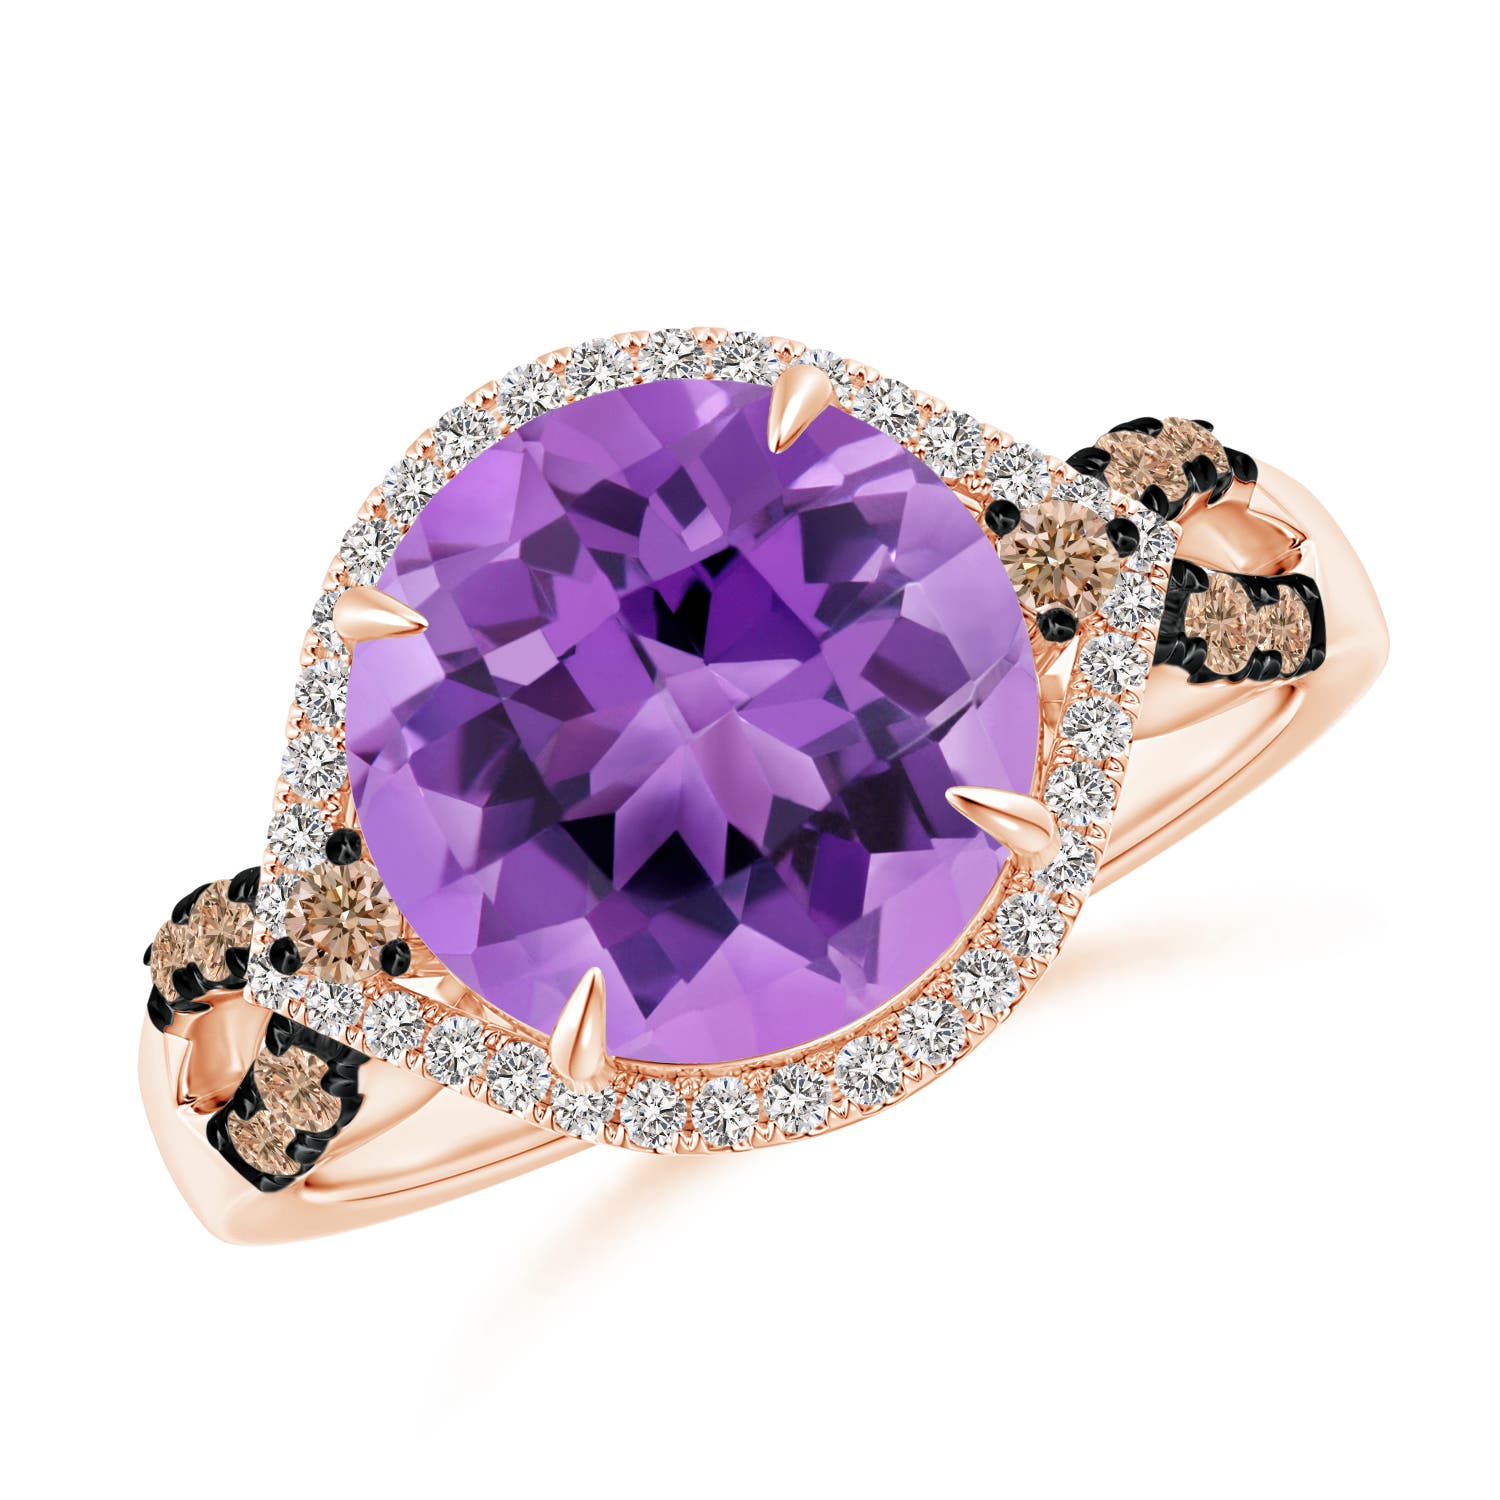 AA - Amethyst / 4.05 CT / 14 KT Rose Gold